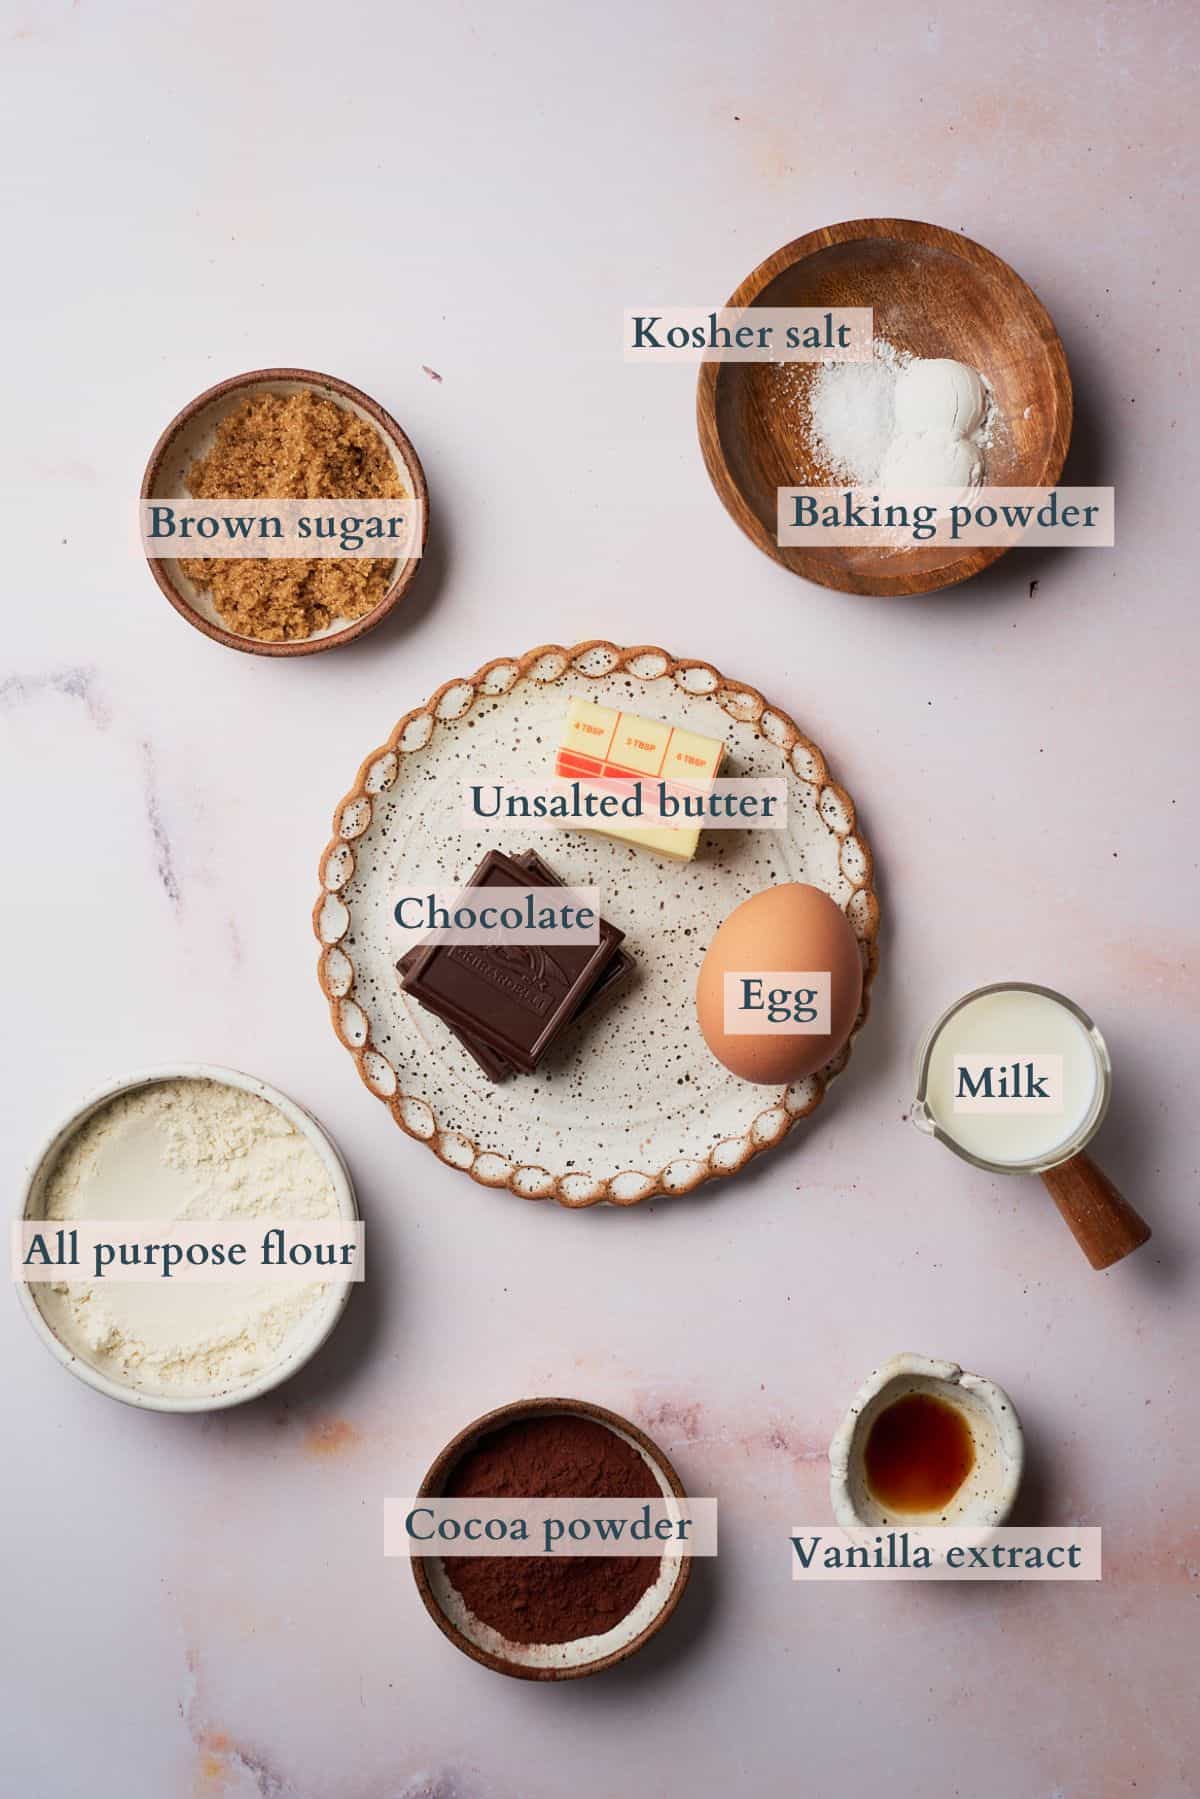 Ingredients to make chocolate lava mug cake on a table laid out and labeled to denote each ingredient.